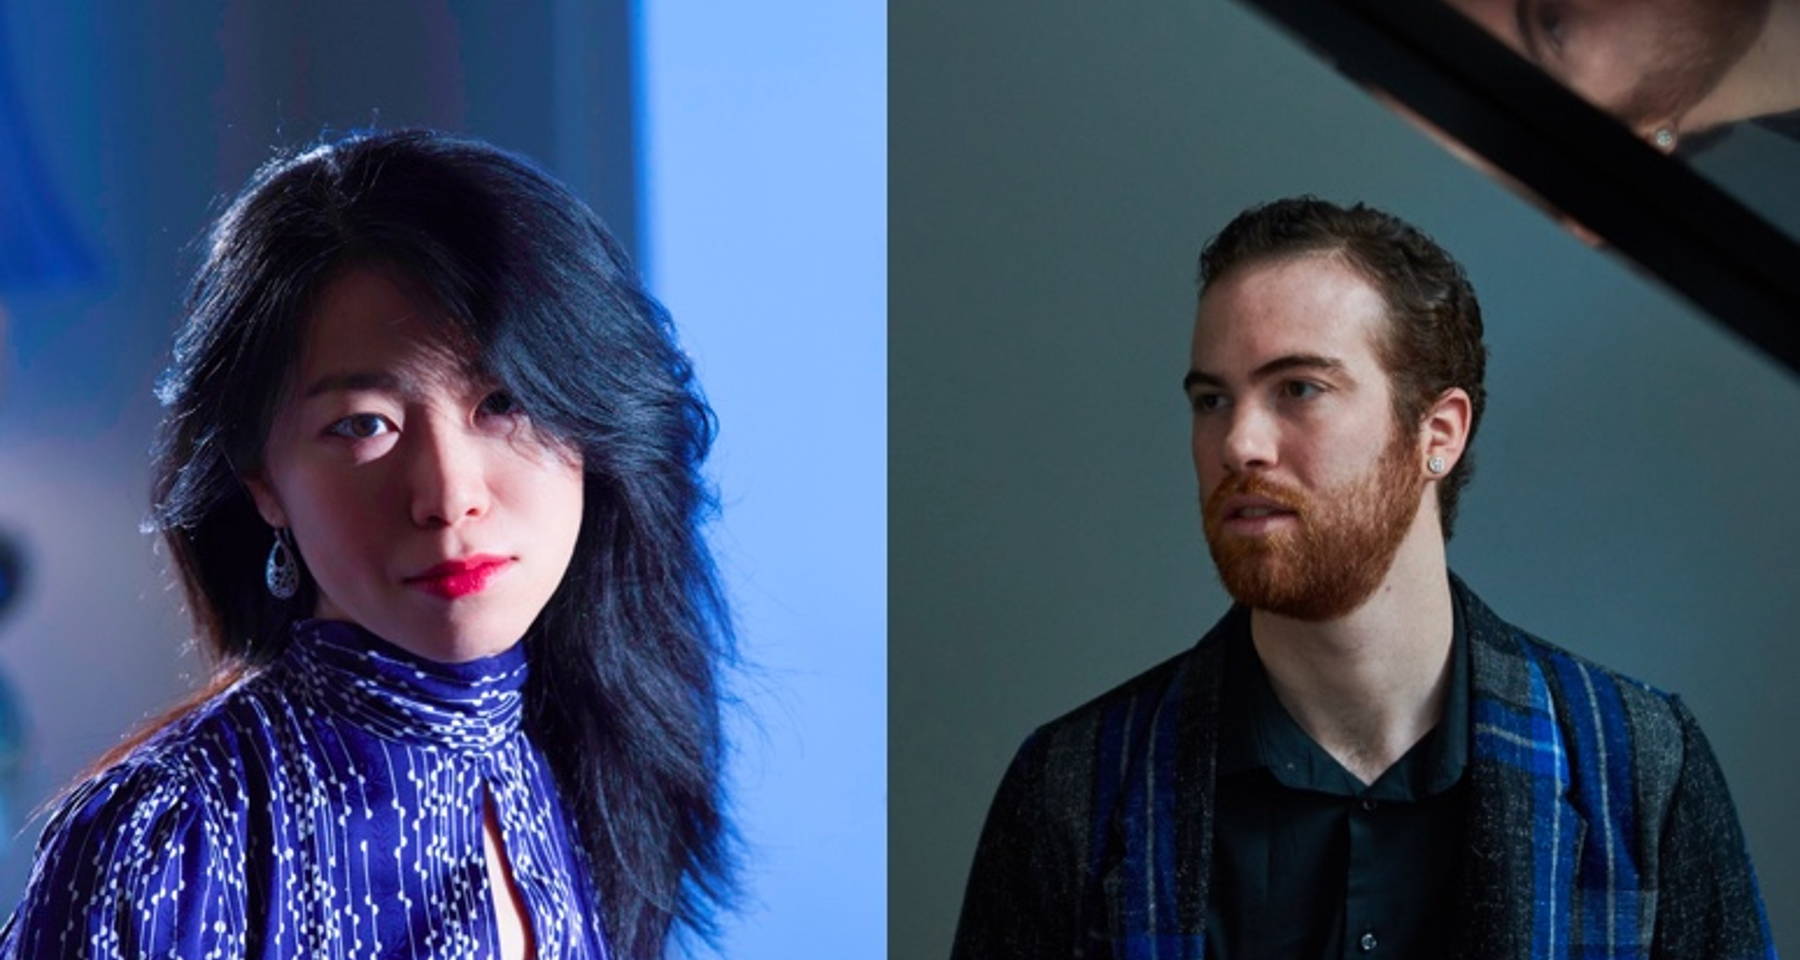 Visions: Sophia Zhou and Daniel Schreiner perform piano works by Chopin, Price, Rachmaninoff, and Still